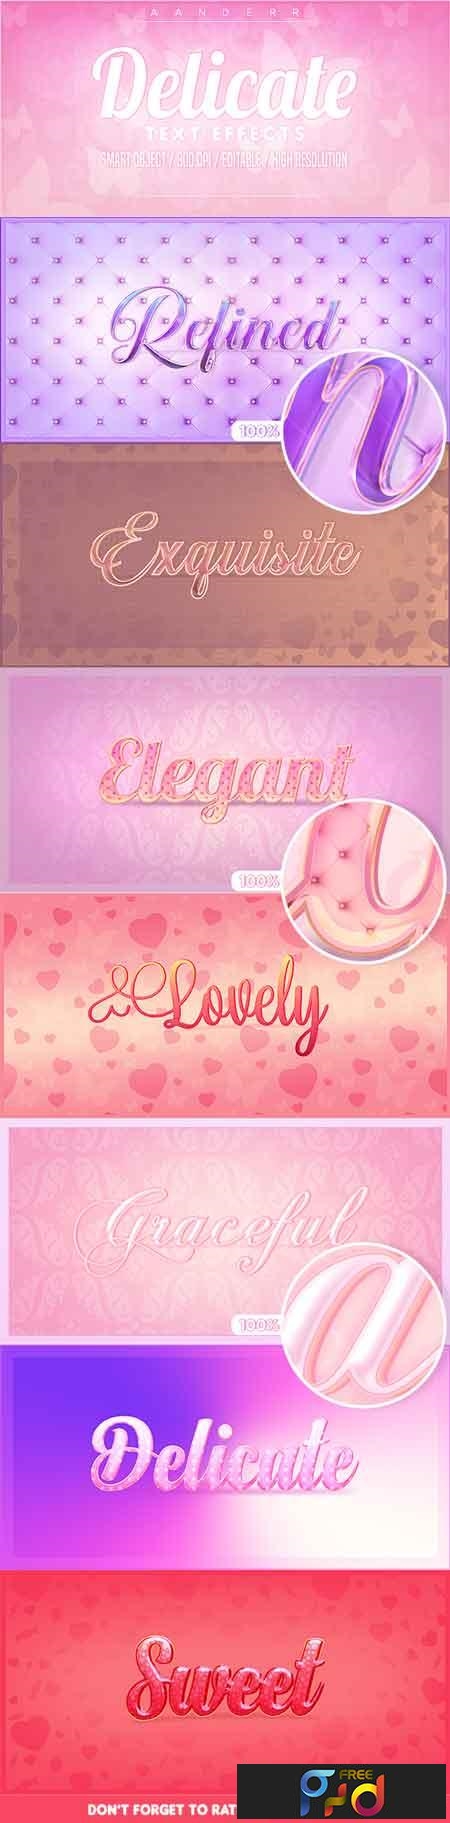 Delicate Photoshop Text Effects 22931110 1